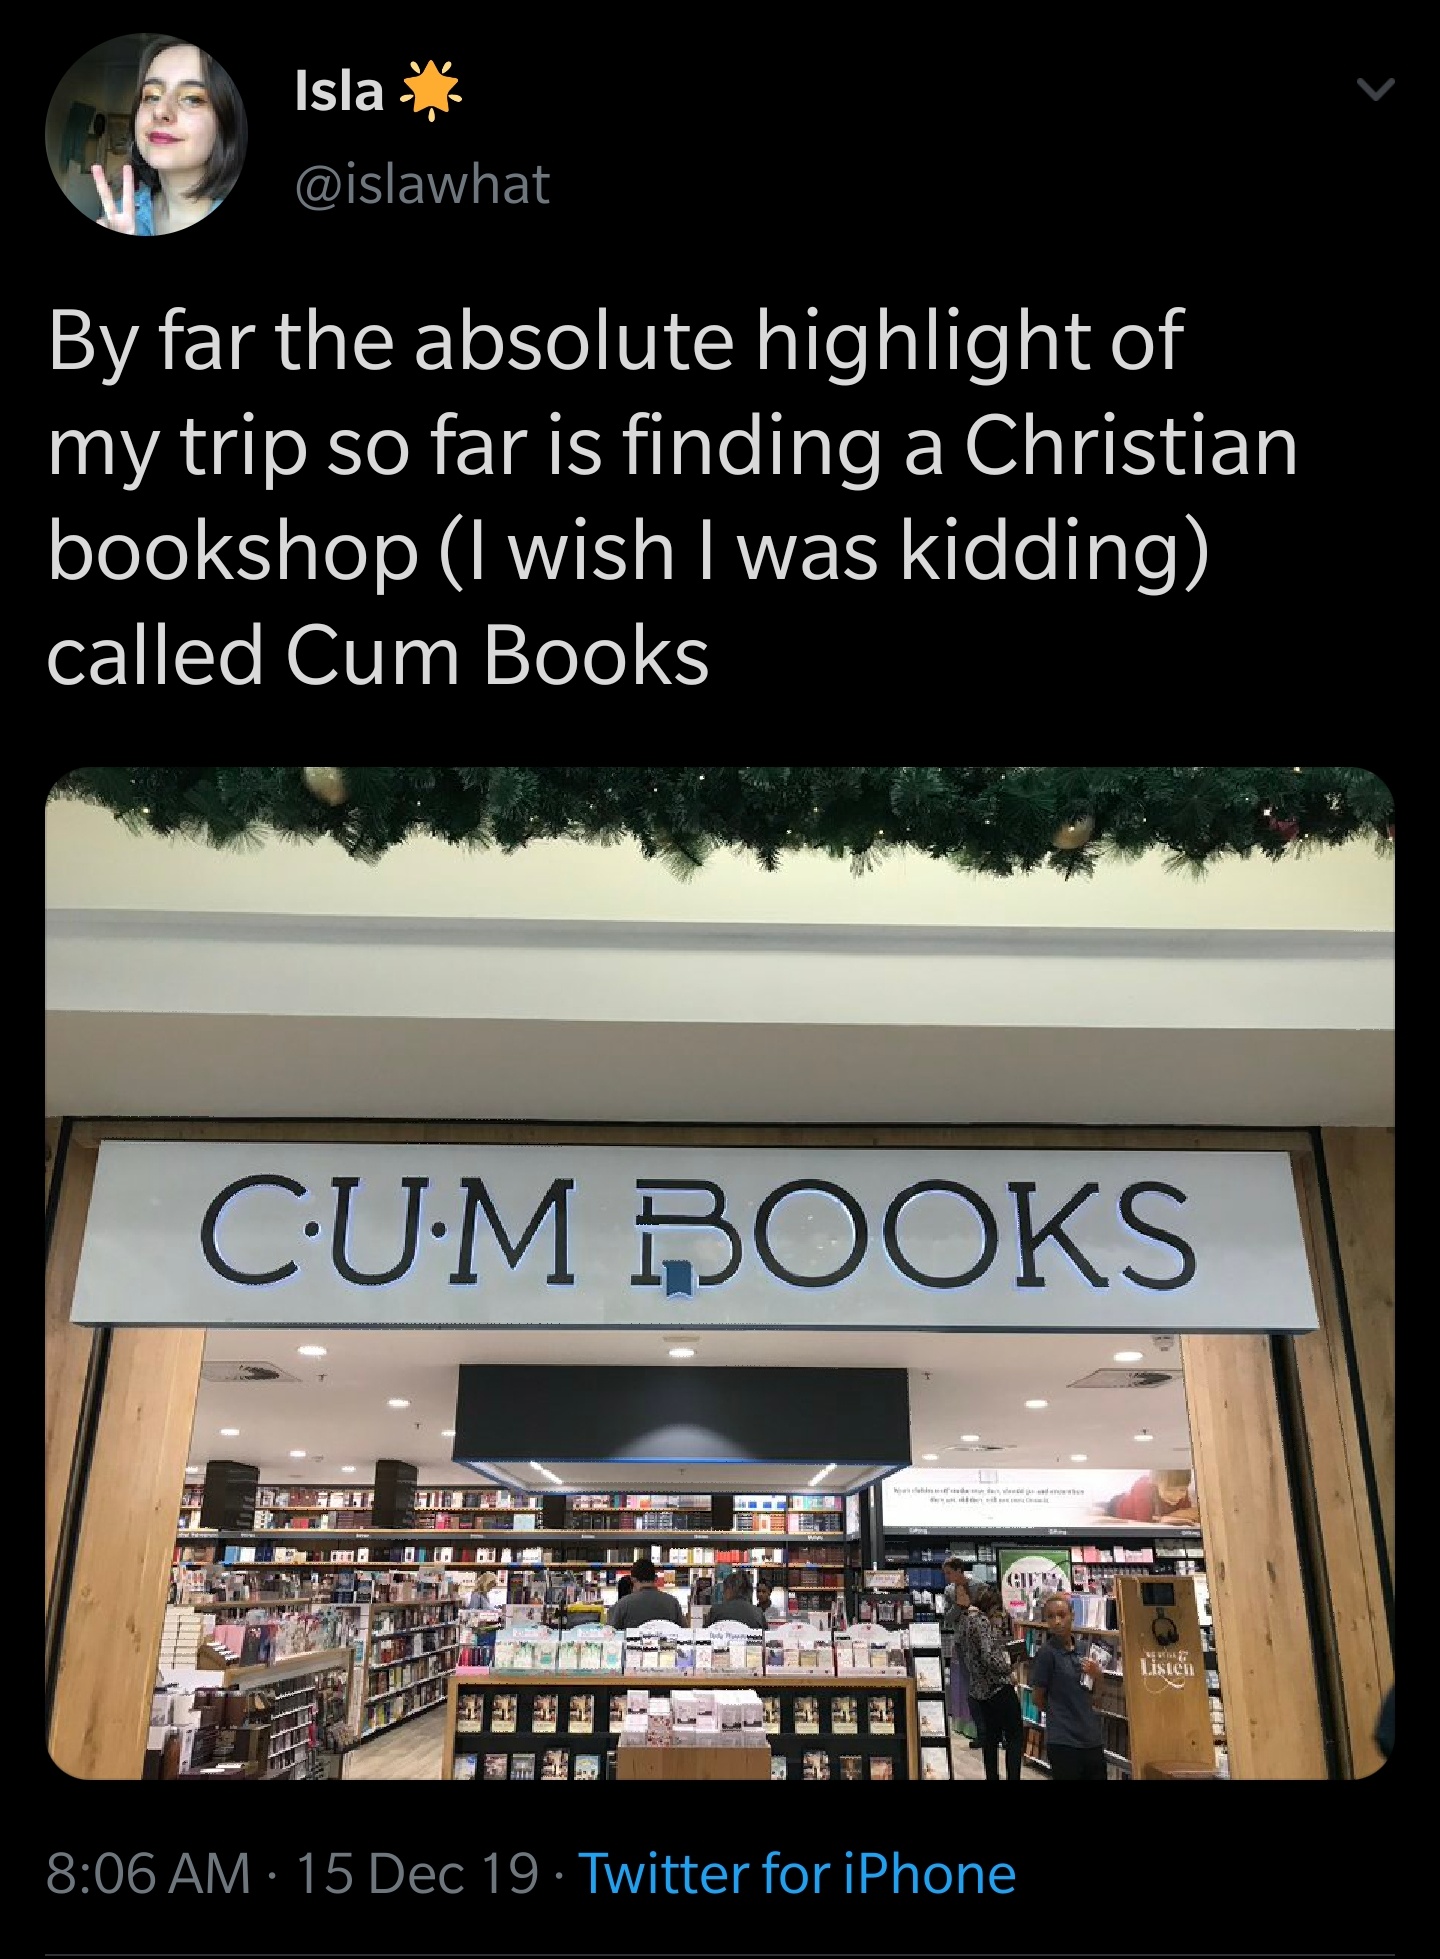 white twitter - Isla Ve By far the absolute highlight of my trip so far is finding a Christian bookshop I wish I was kidding called Cum Books Cum Books 15 Dec 19. Twitter for iPhone